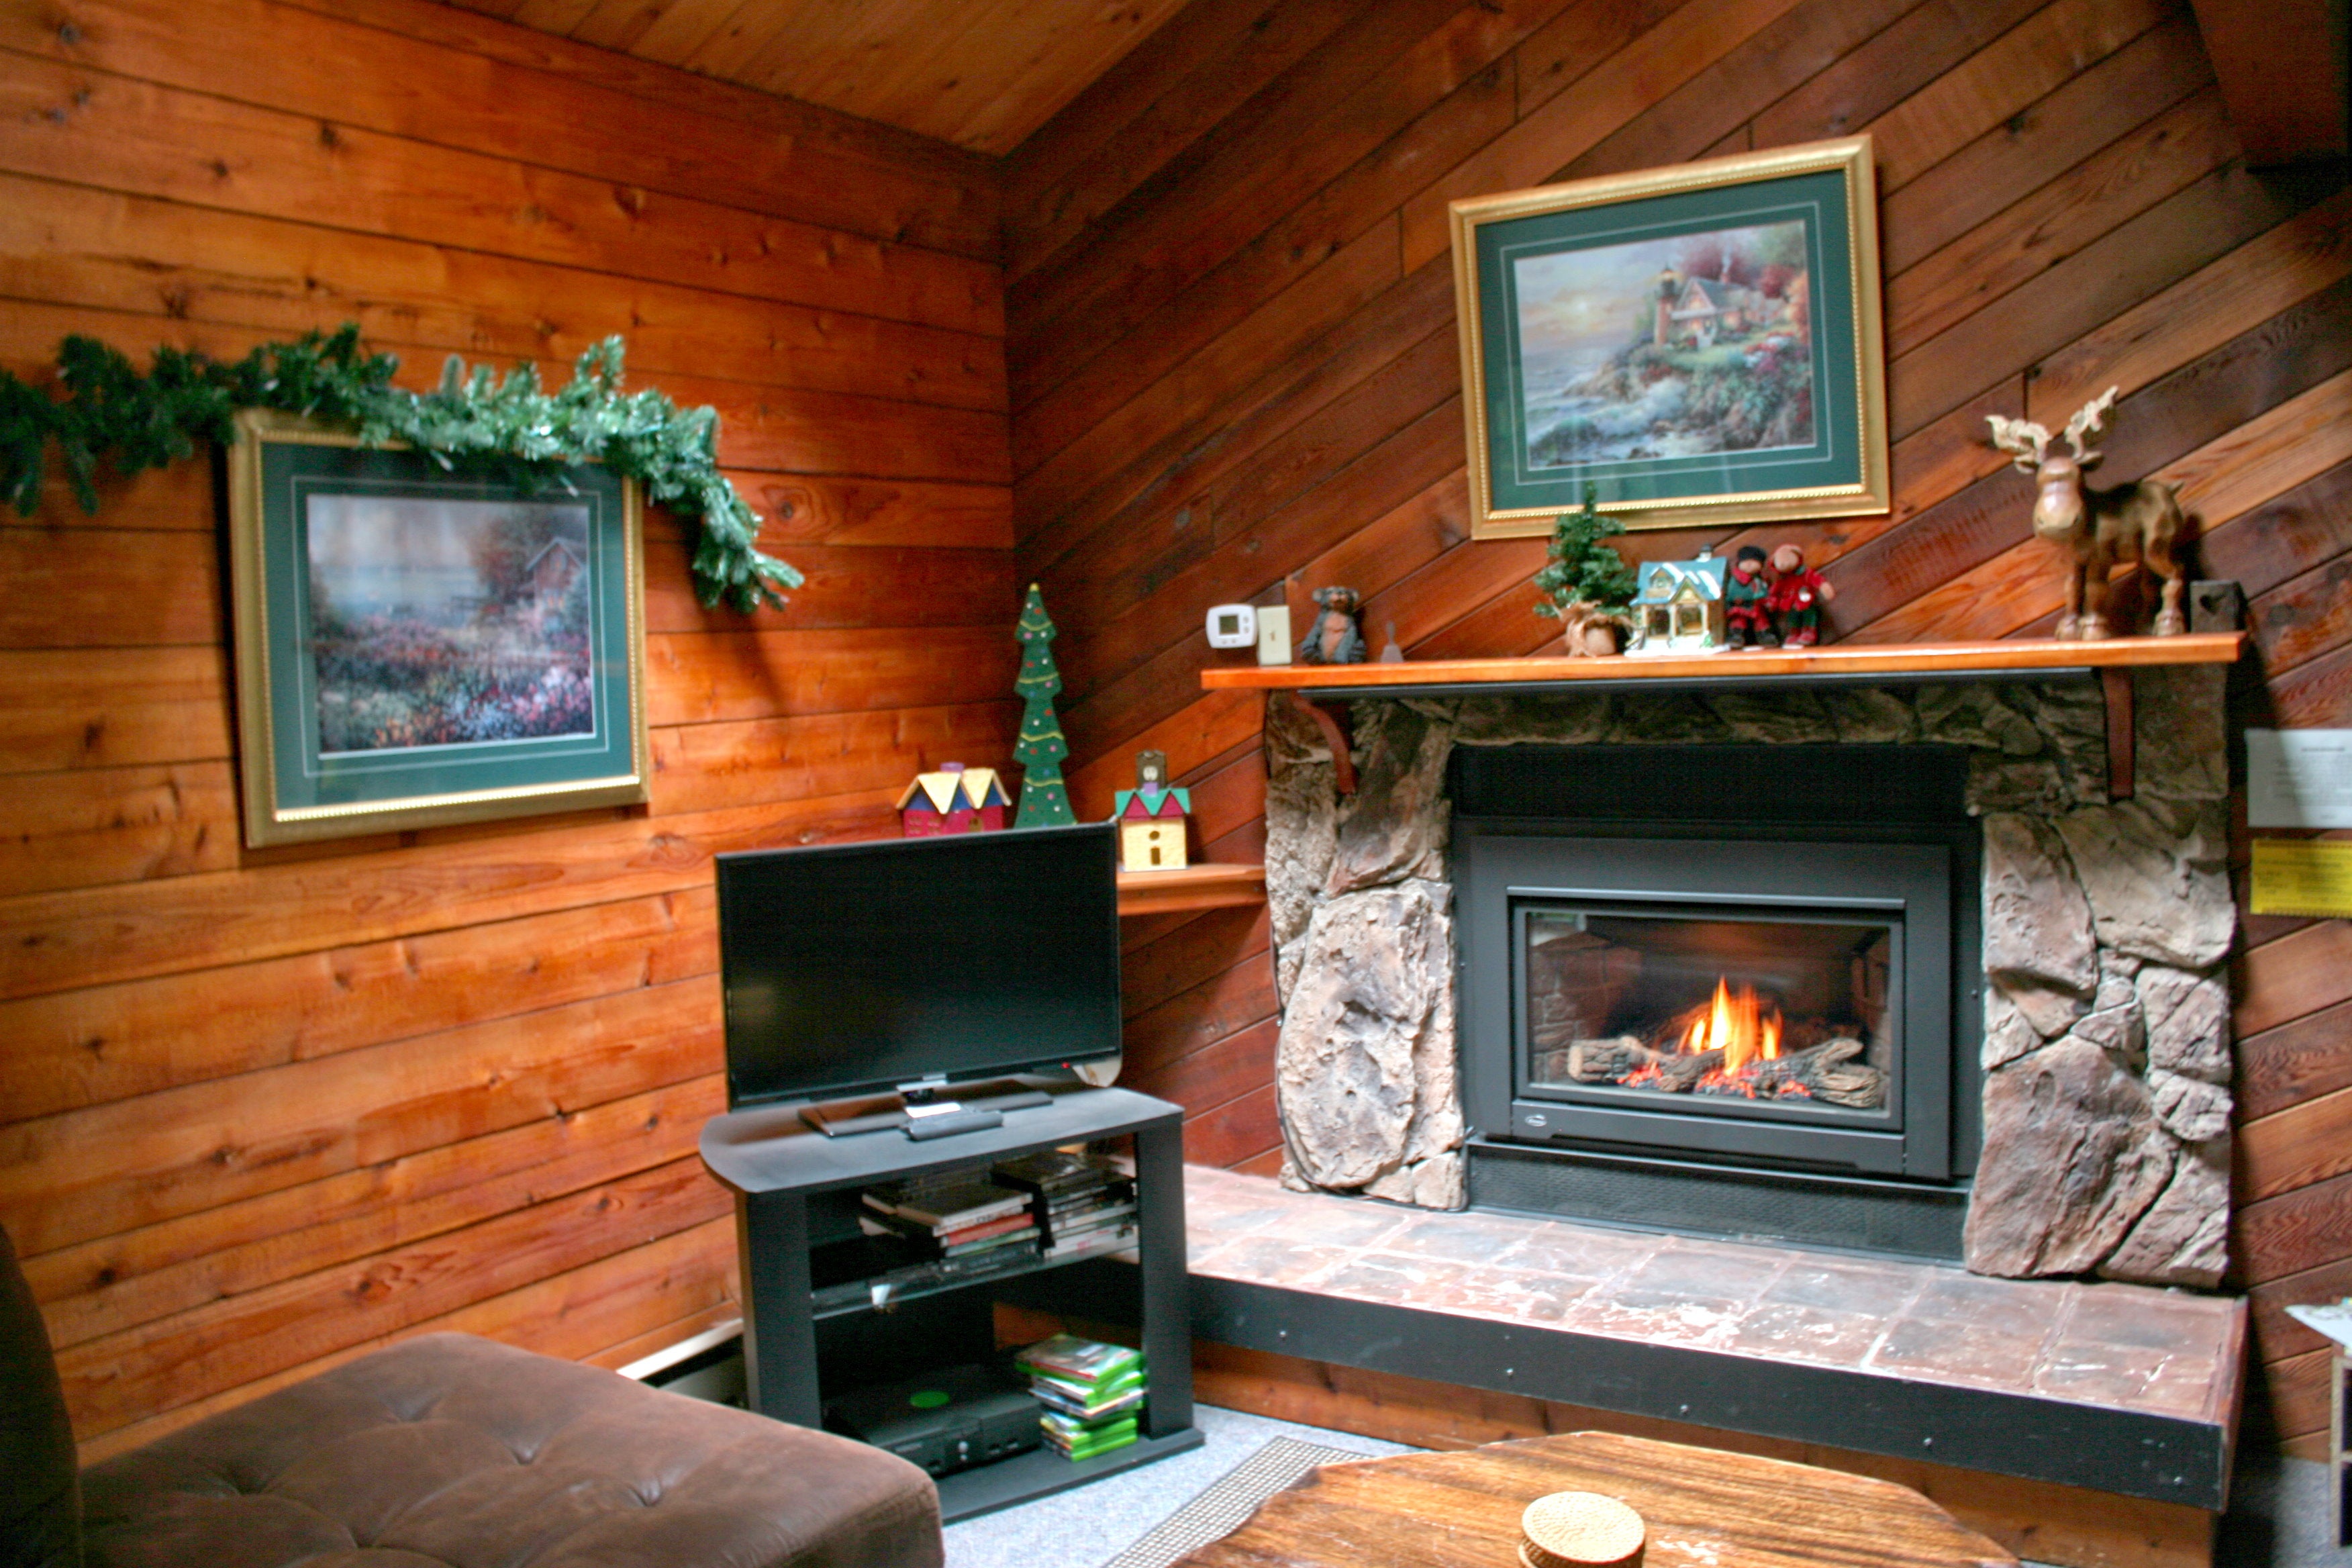 Camper submitted image from Mt. Baker Lodging - Cabin #26 - HOT TUB, FIREPLACE, W/D, D/W, BBQ, PETS OK, SLEEPS-8! - 3